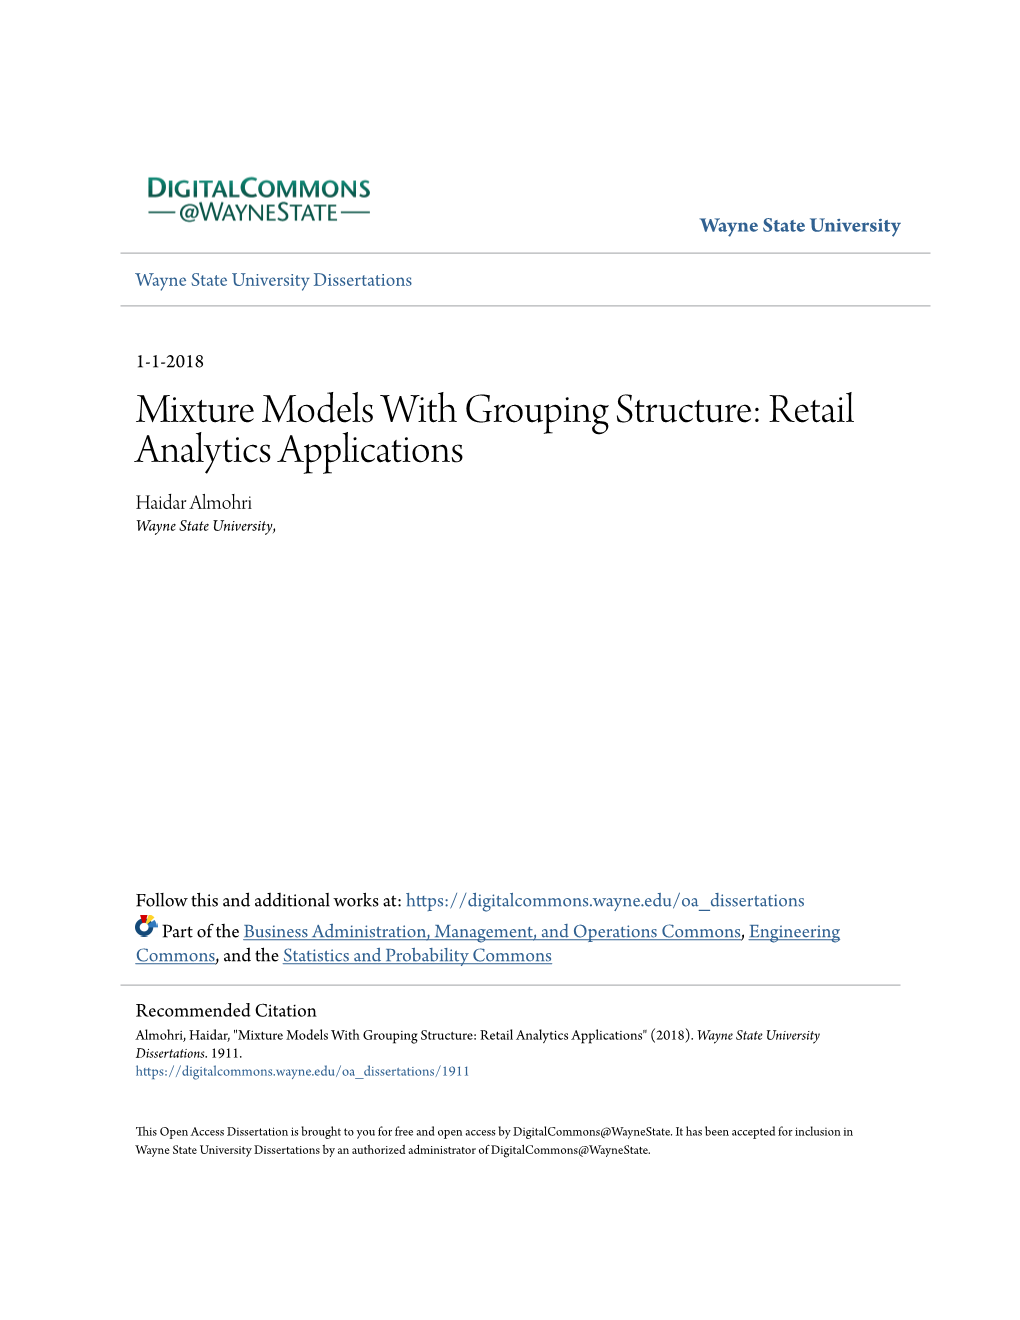 Mixture Models with Grouping Structure: Retail Analytics Applications Haidar Almohri Wayne State University